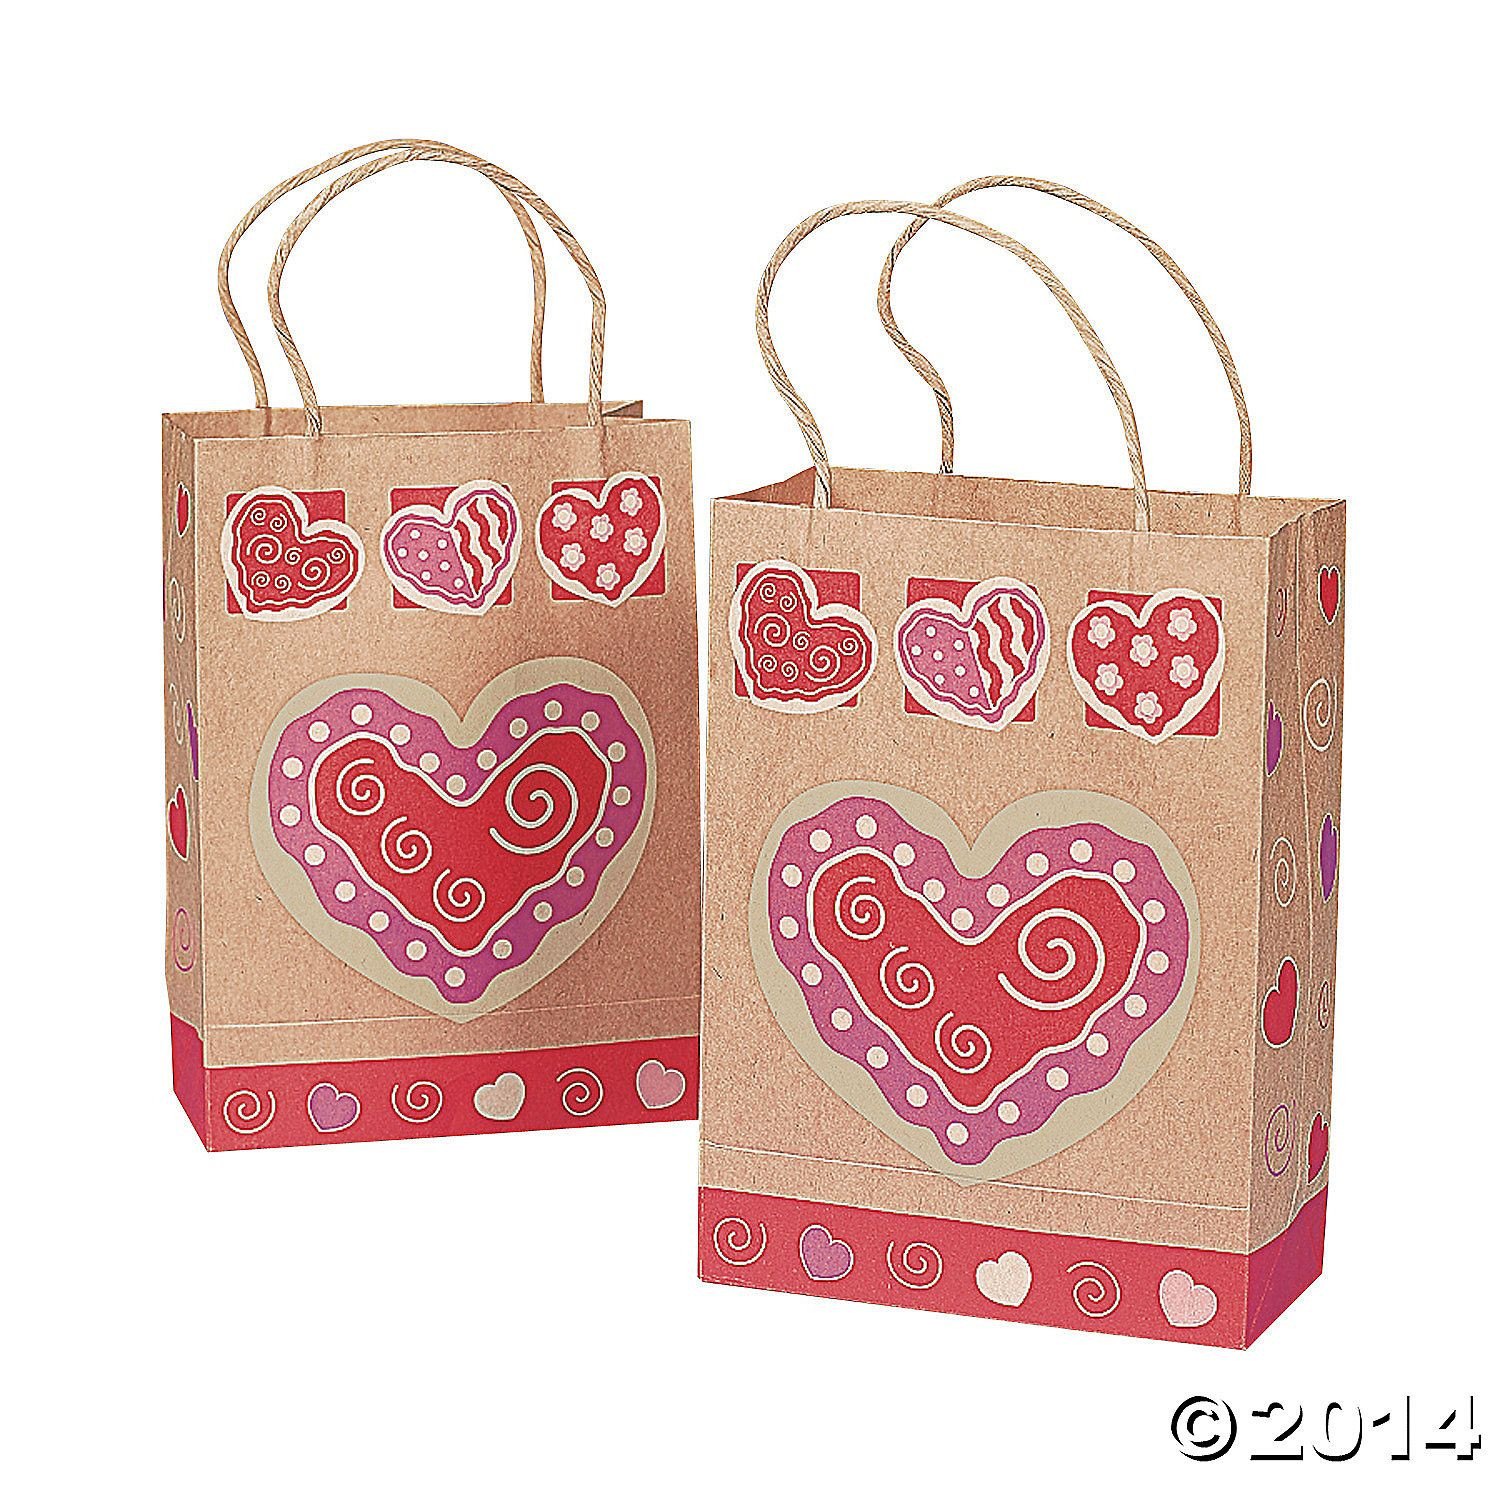 Valentine Gift Bags Ideas
 Brown Paper Valentine Gift Bags with Heart